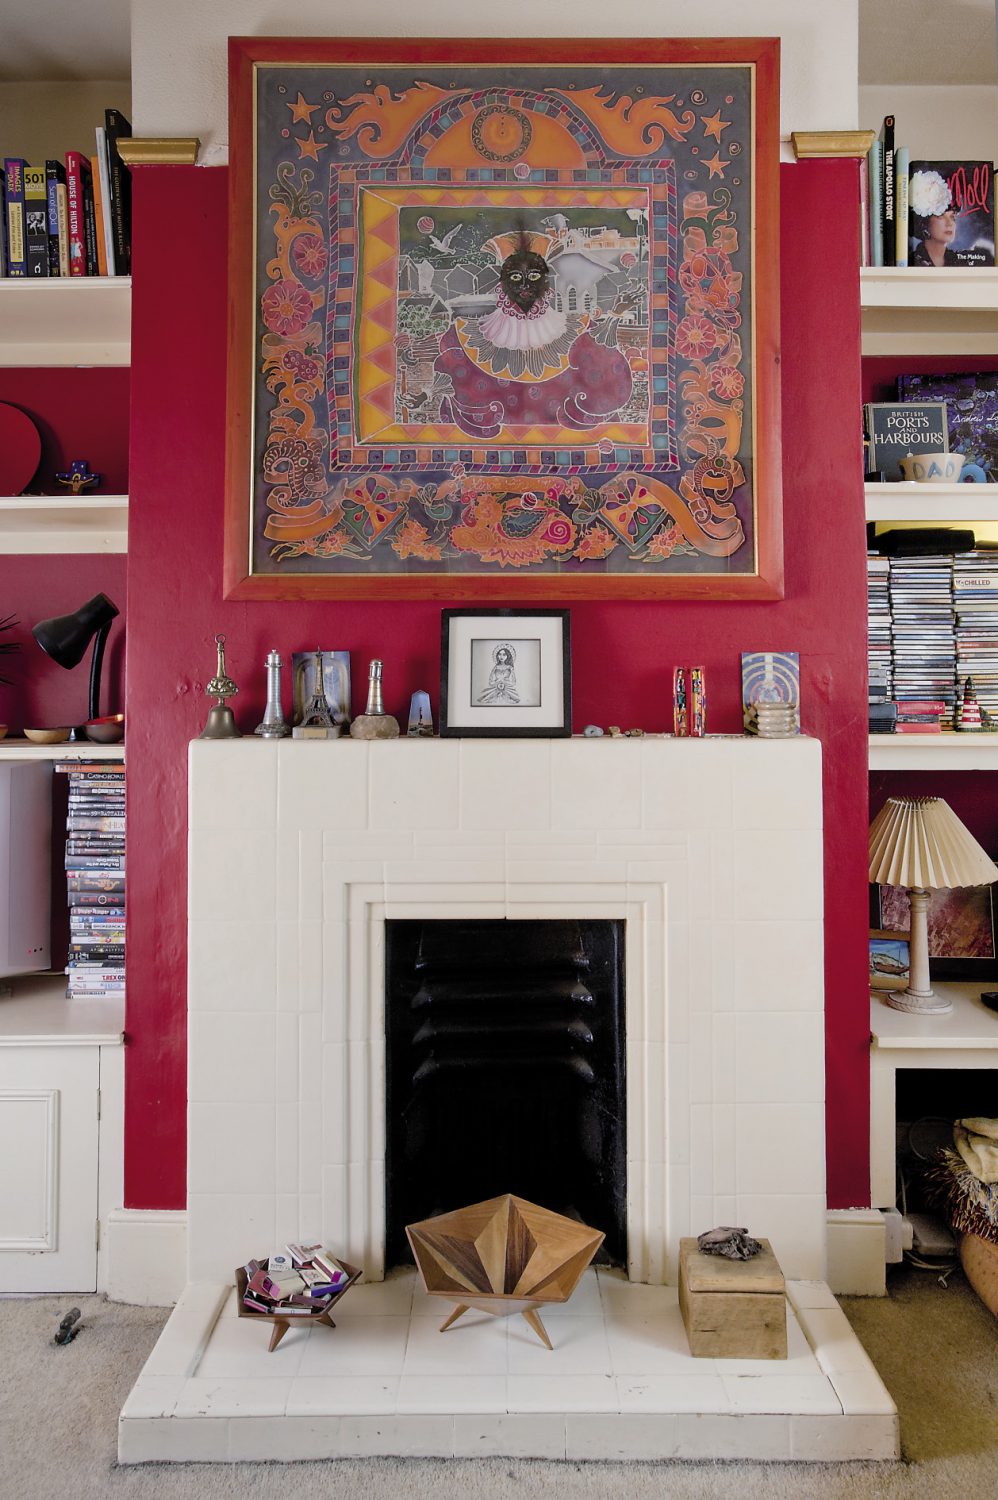 The sitting room is painted a rich, British red with a gold picture rail. Alastair’s love of travel is evident throughout the room, from the oriental rug on the floor to the kilim-style printed fabric that covers the armchair